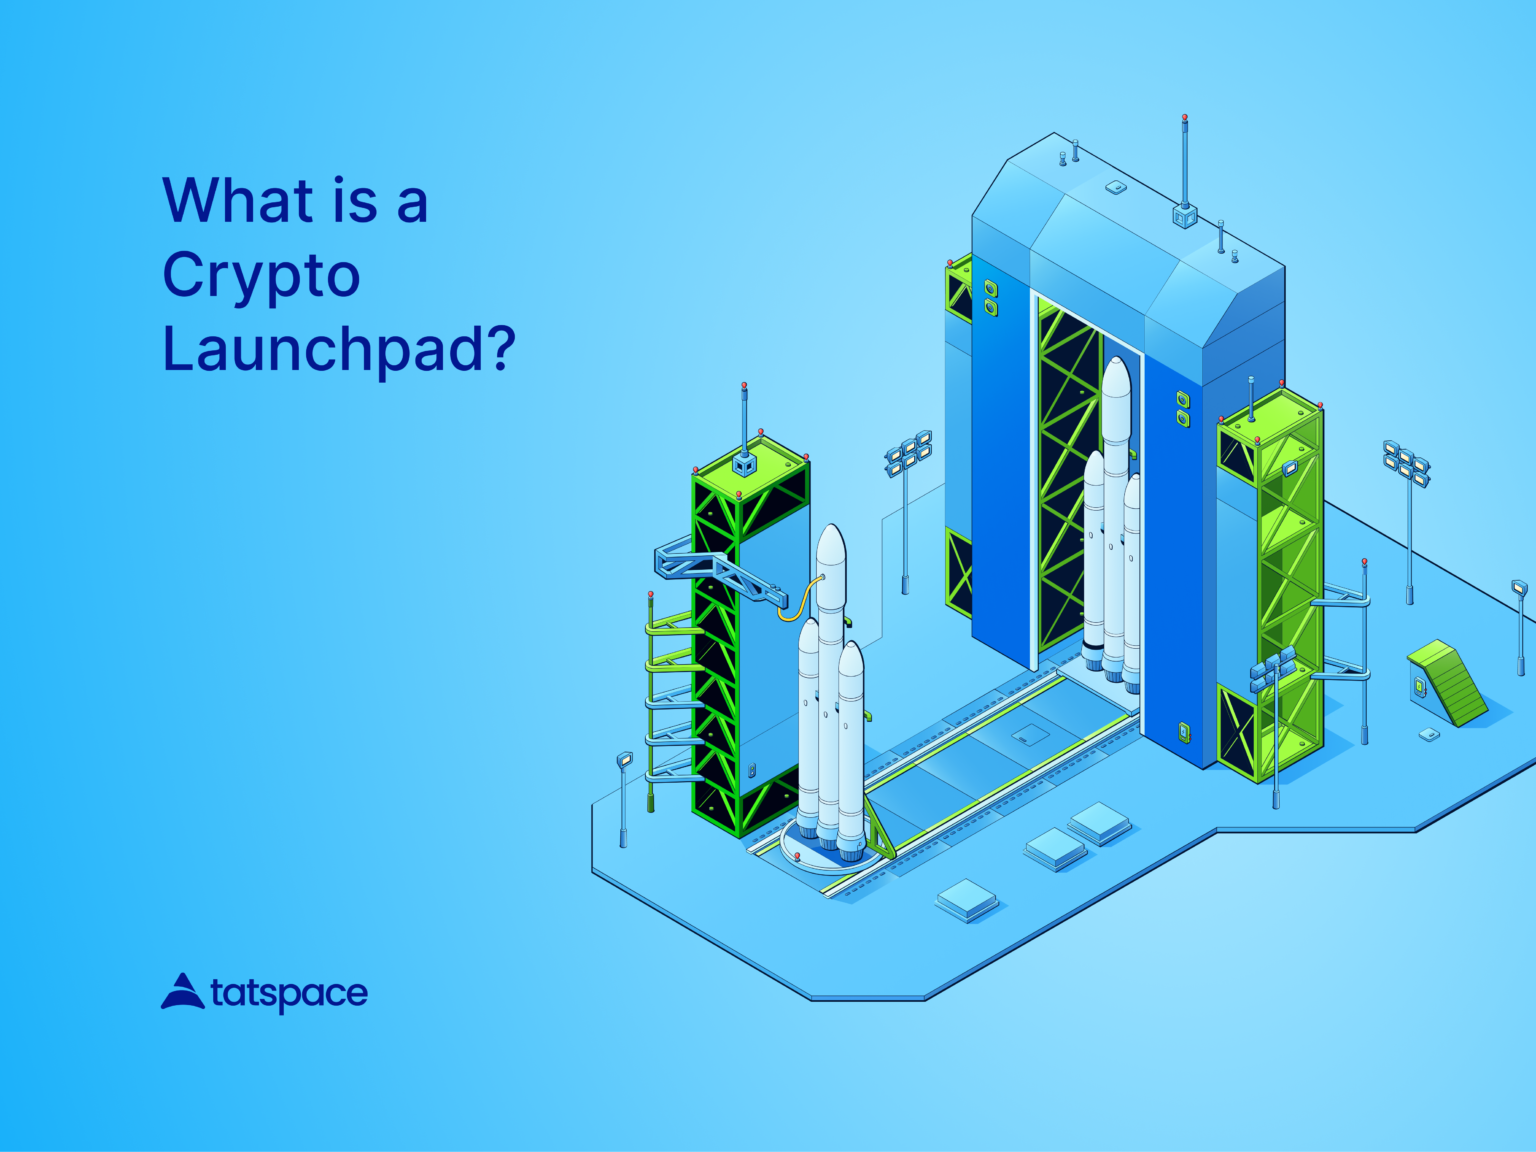 what is a launchpad crypto